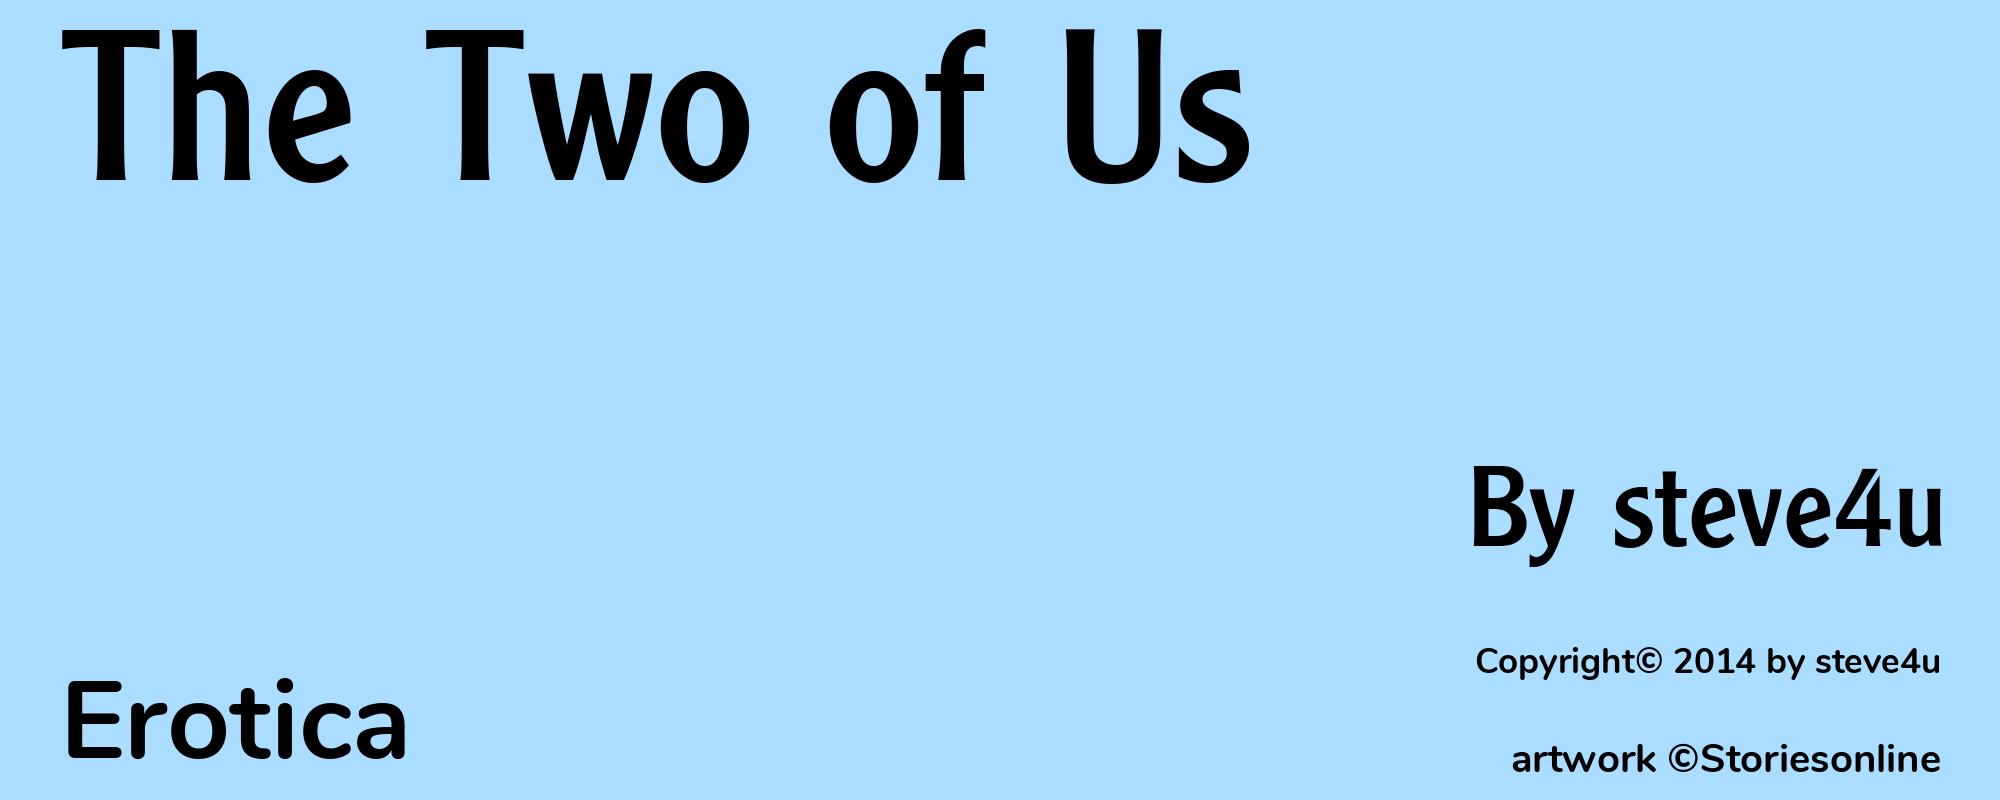 The Two of Us - Cover